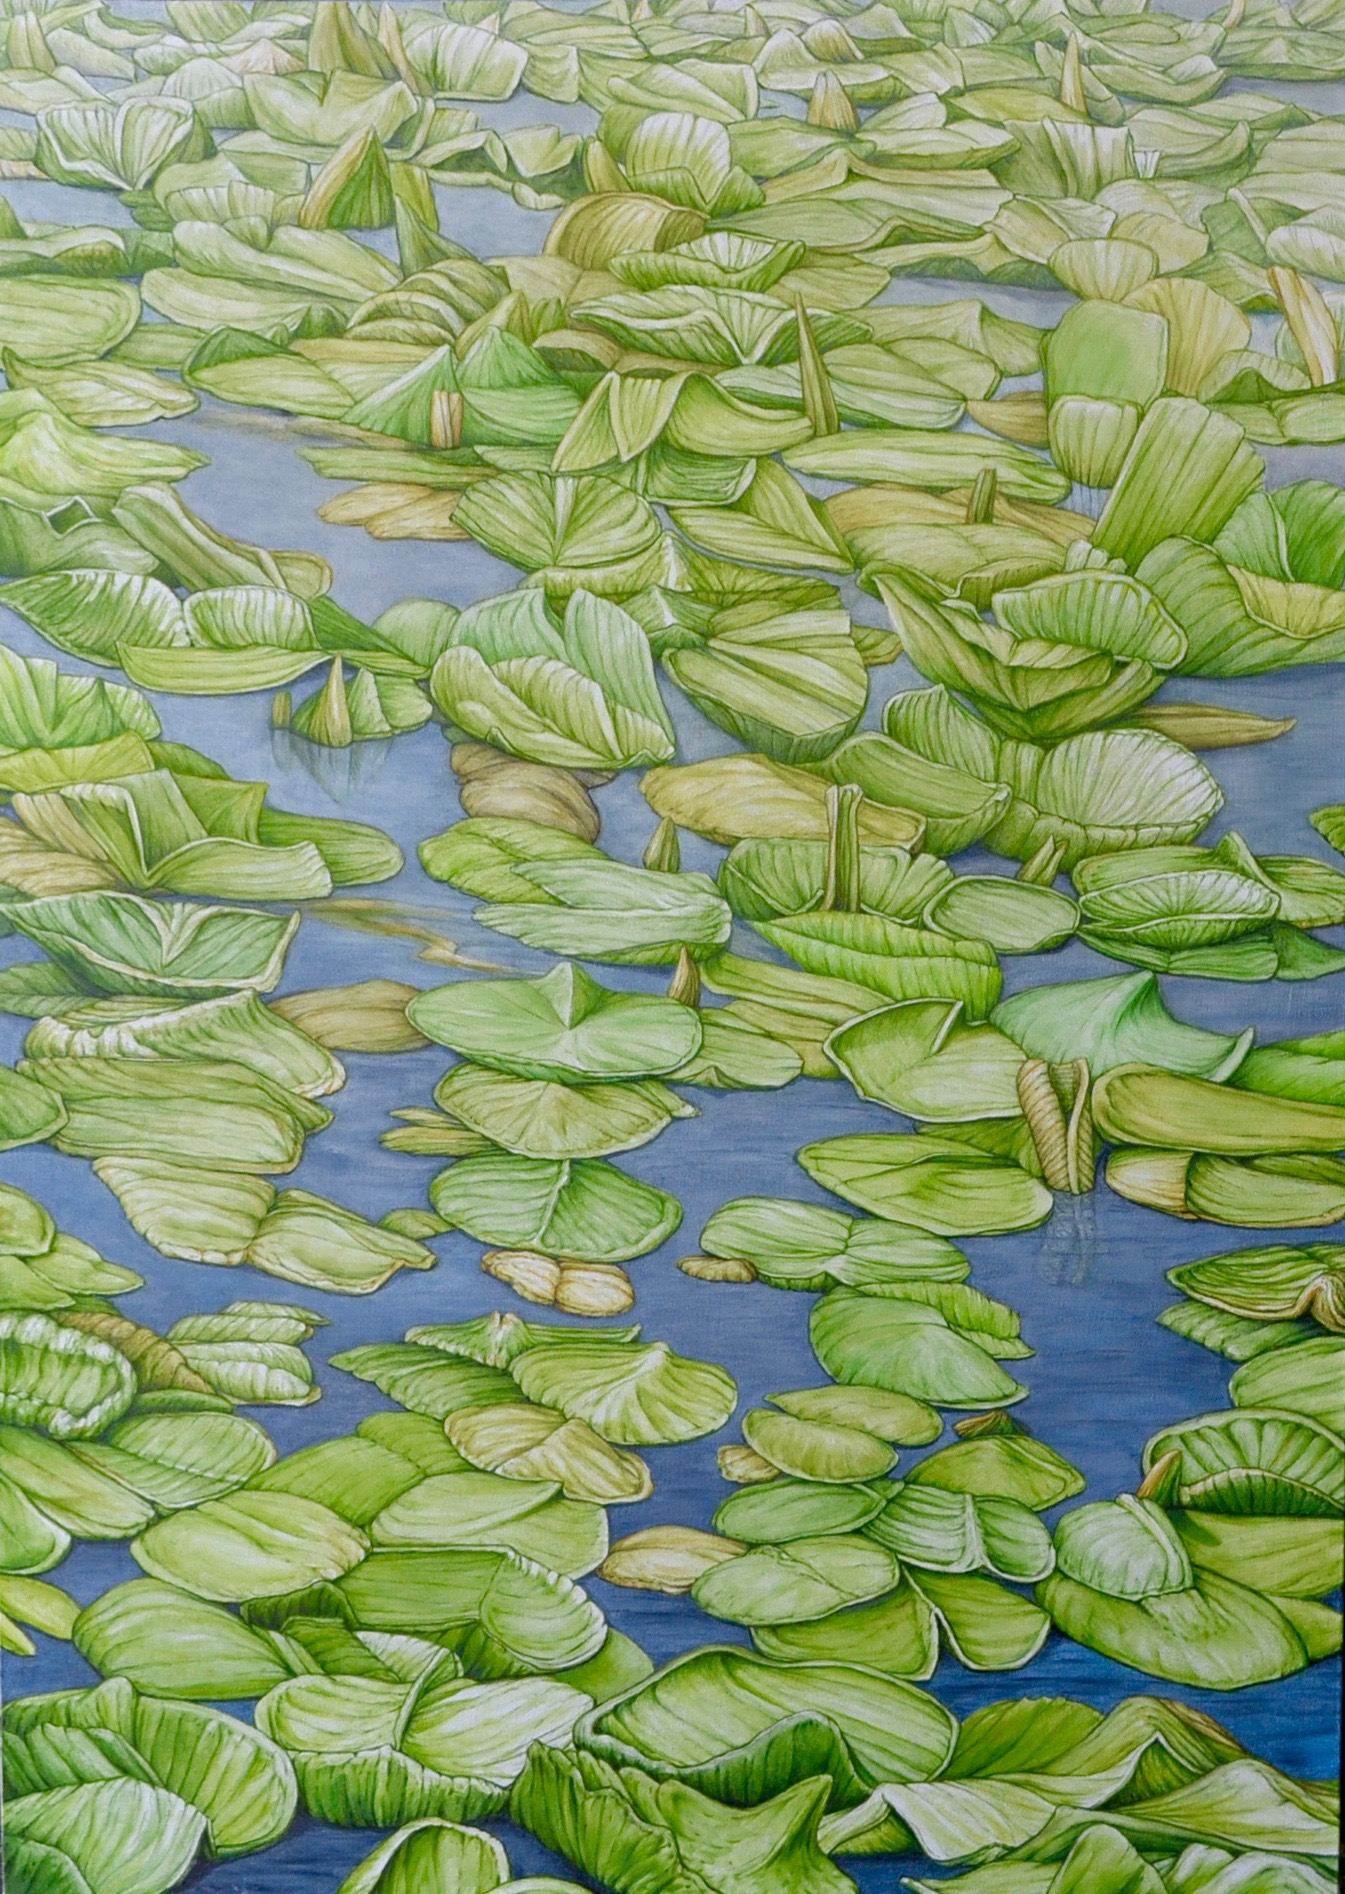 LILLY POND, 42 x 30 inches, oil on canvas